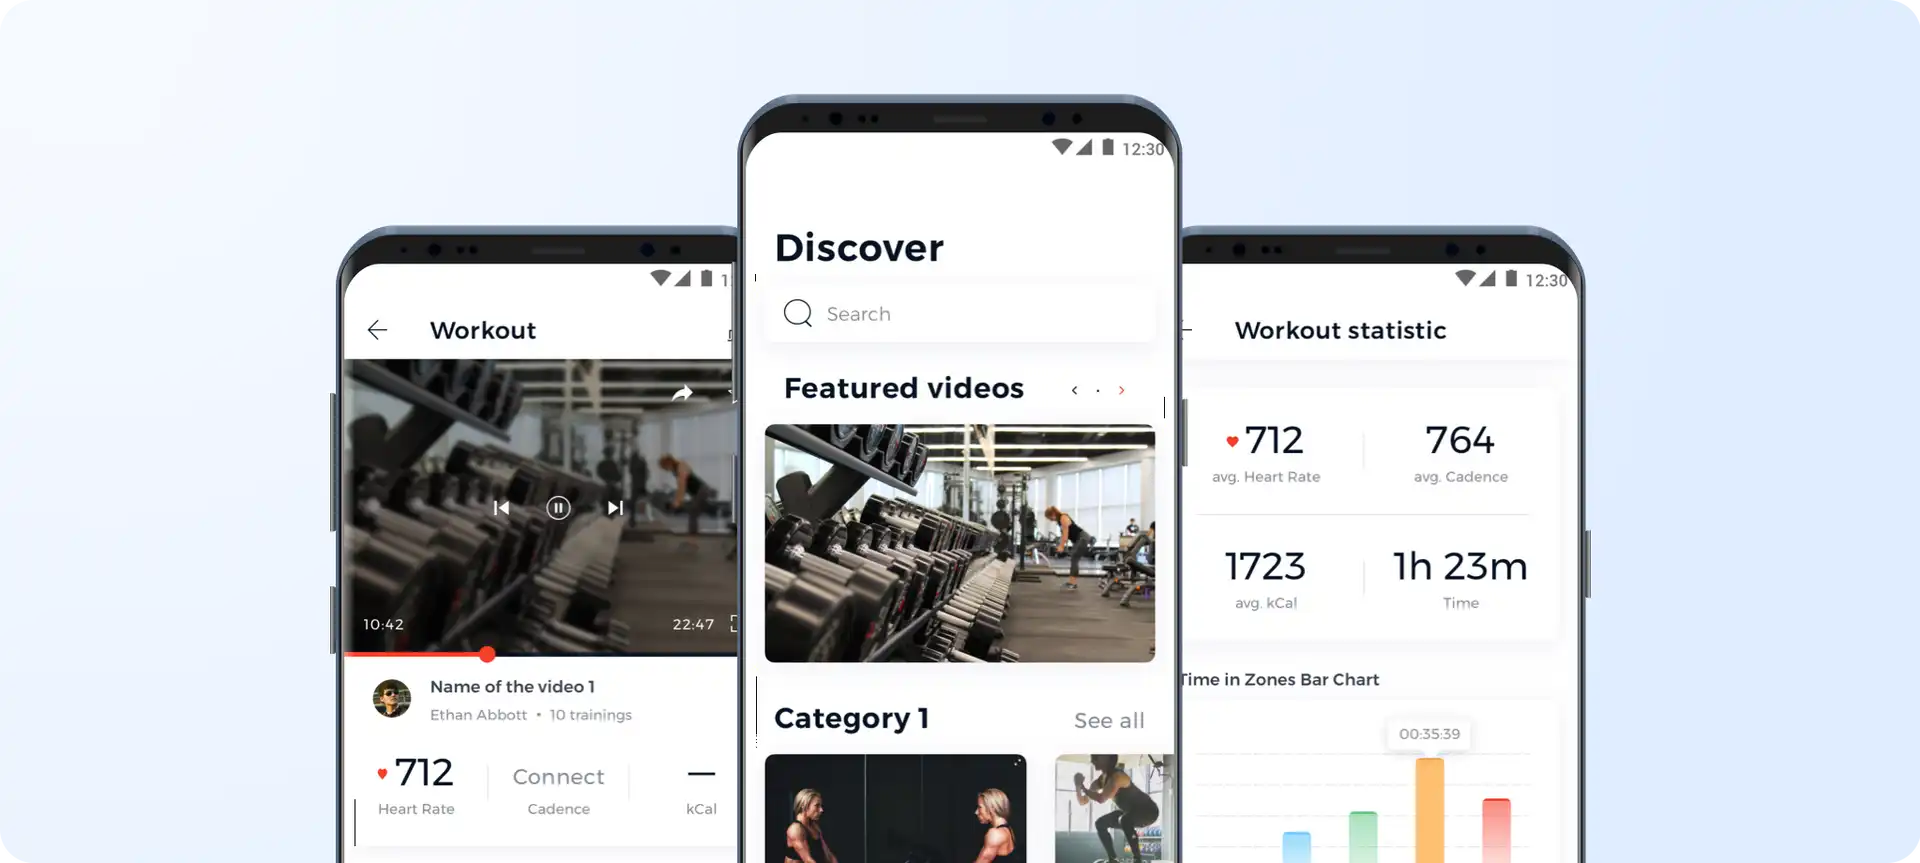 Platoon Fit focuses on health monitoring gadgets as a special part of online workouts (*shot by Stormotion*)